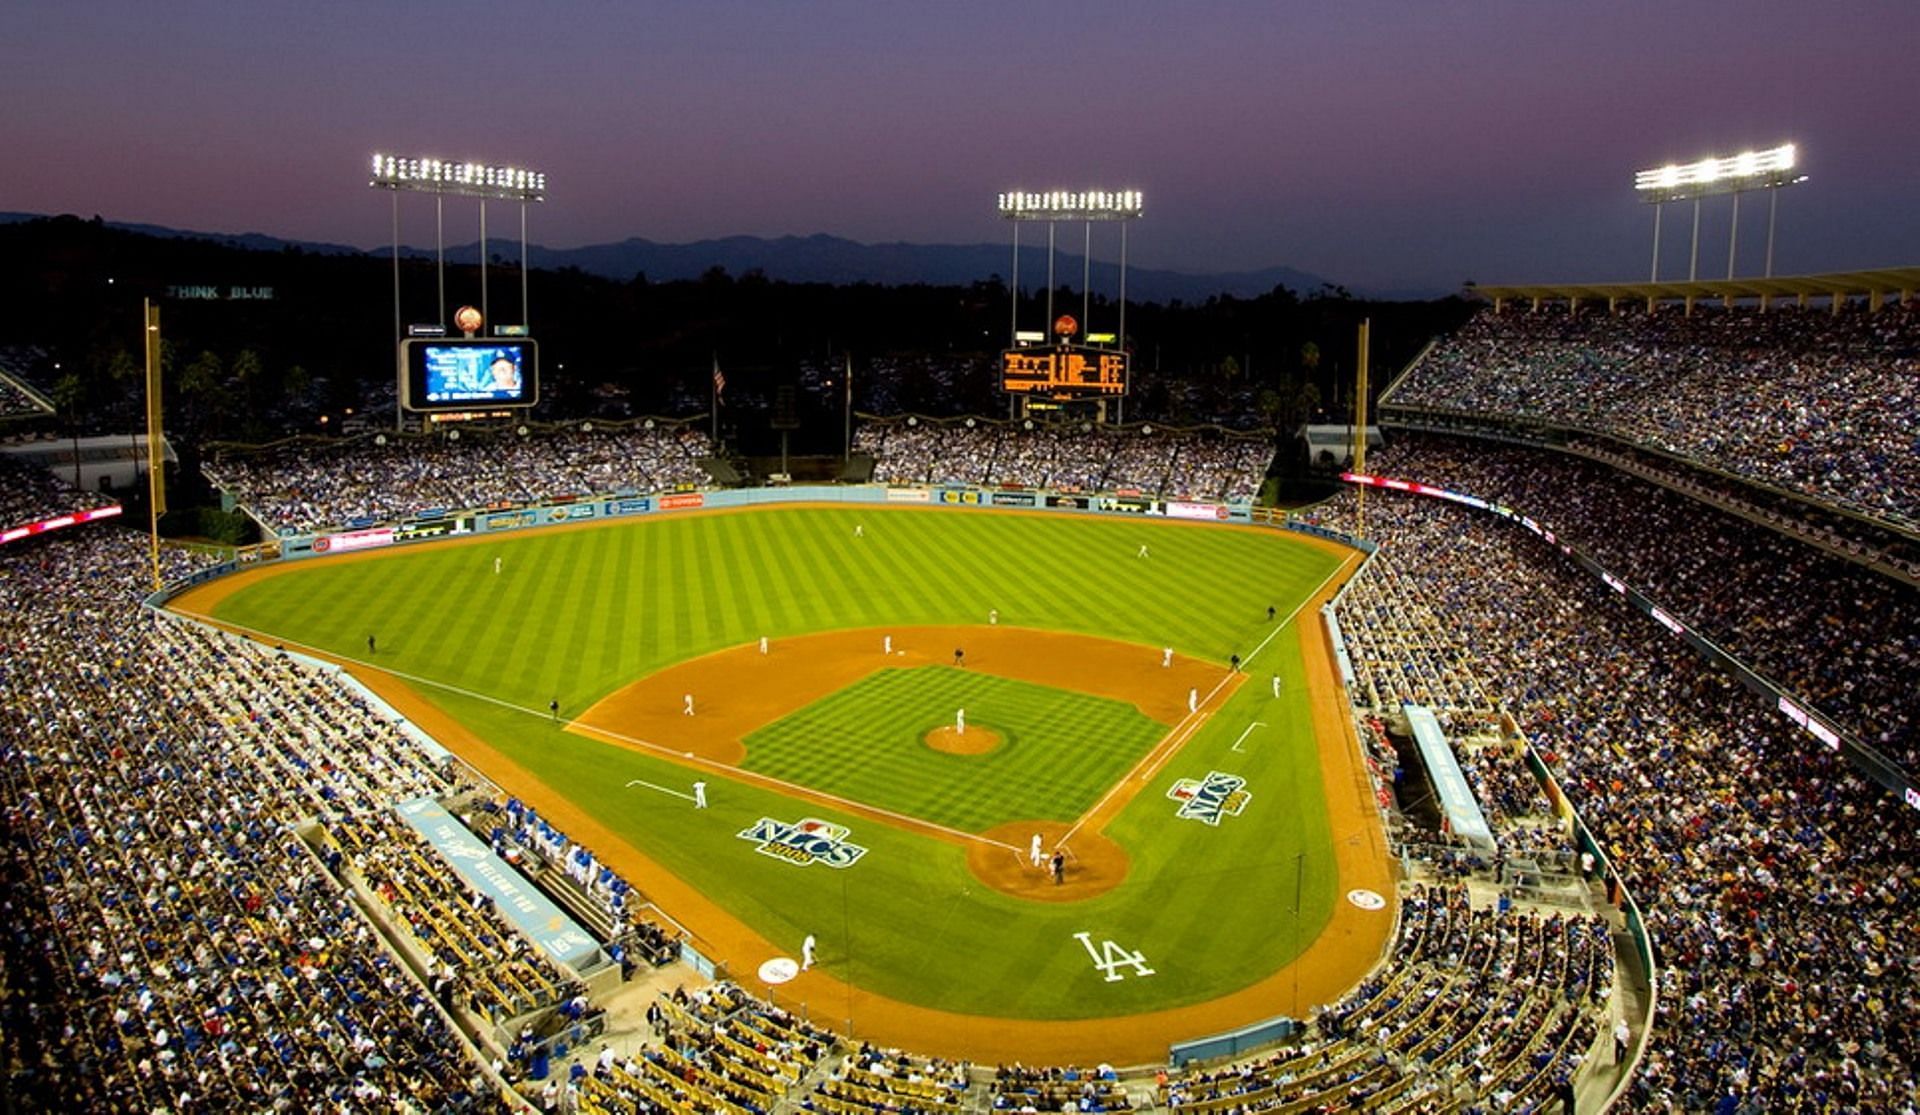 Dodger Stadium, home of the Los Angeles Dodgers, built in 1962 is set to host the MLB All-Star Game for the first time since 1980.